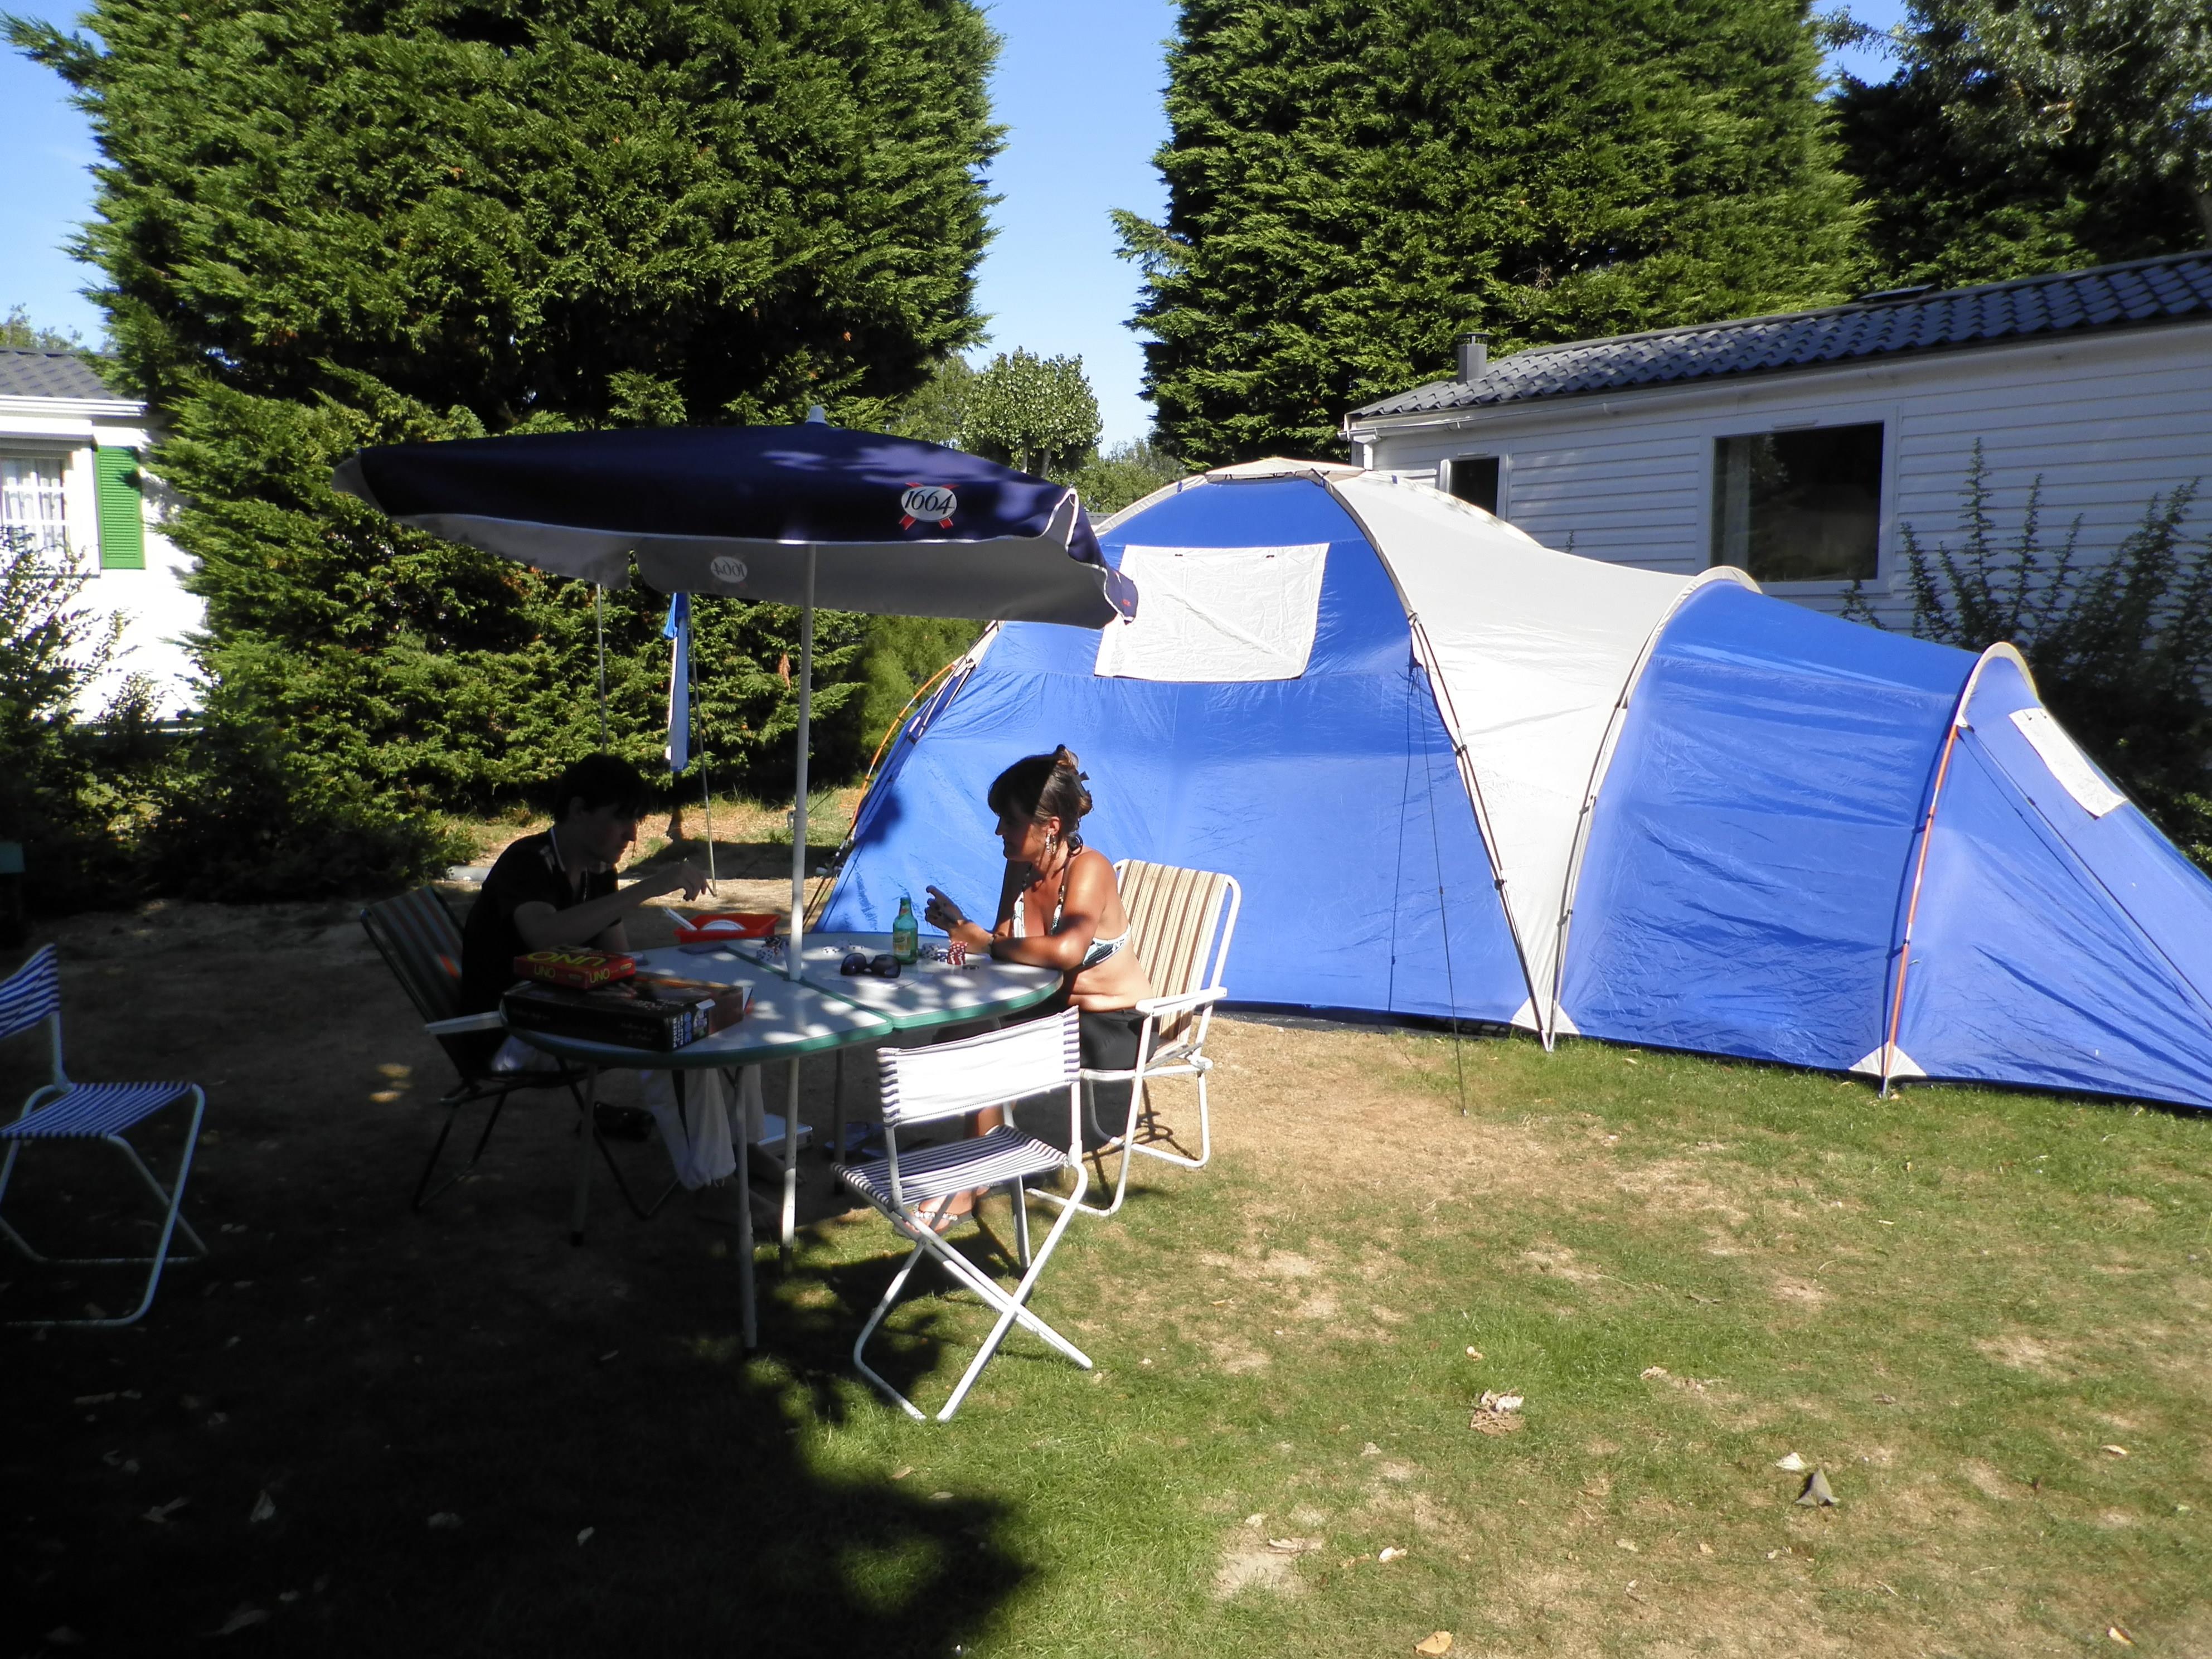 Pitch tent or trailer tent – 7.50 m  (water, electricity, 2 people and 1 vehicle) 1/2 Ppl. 1/2 pers.